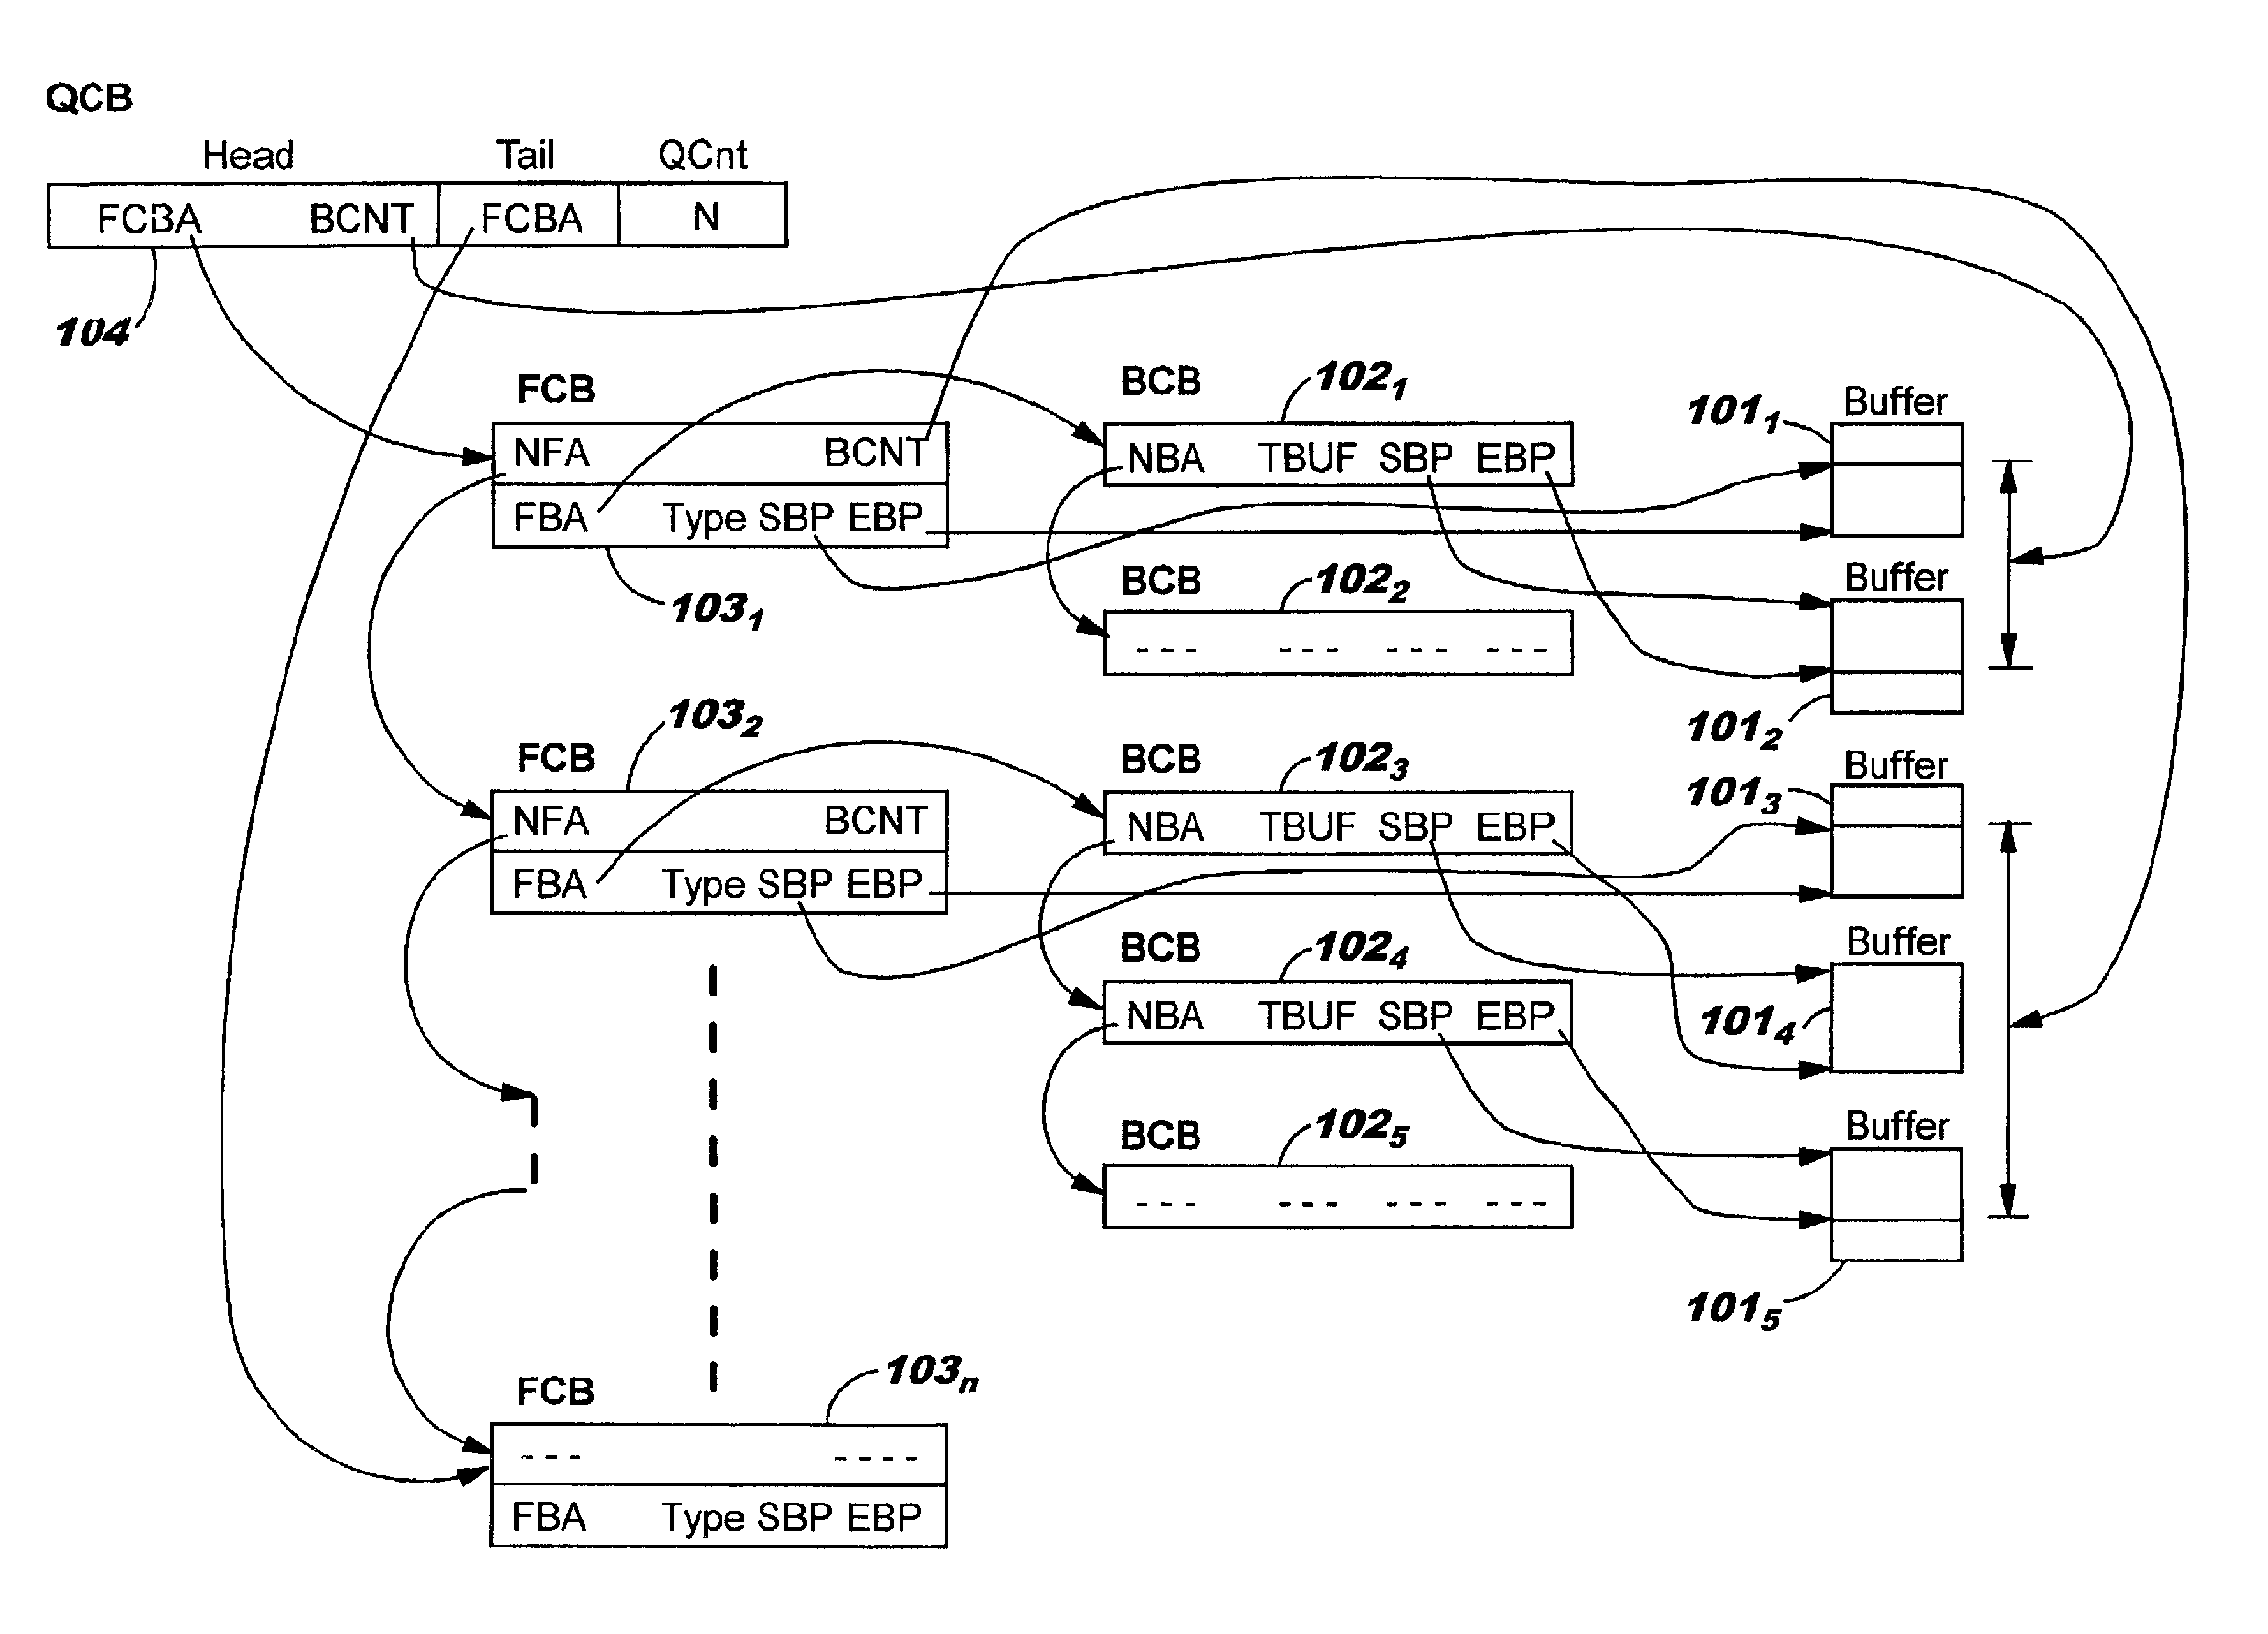 Data structures for efficient processing of multicast transmissions